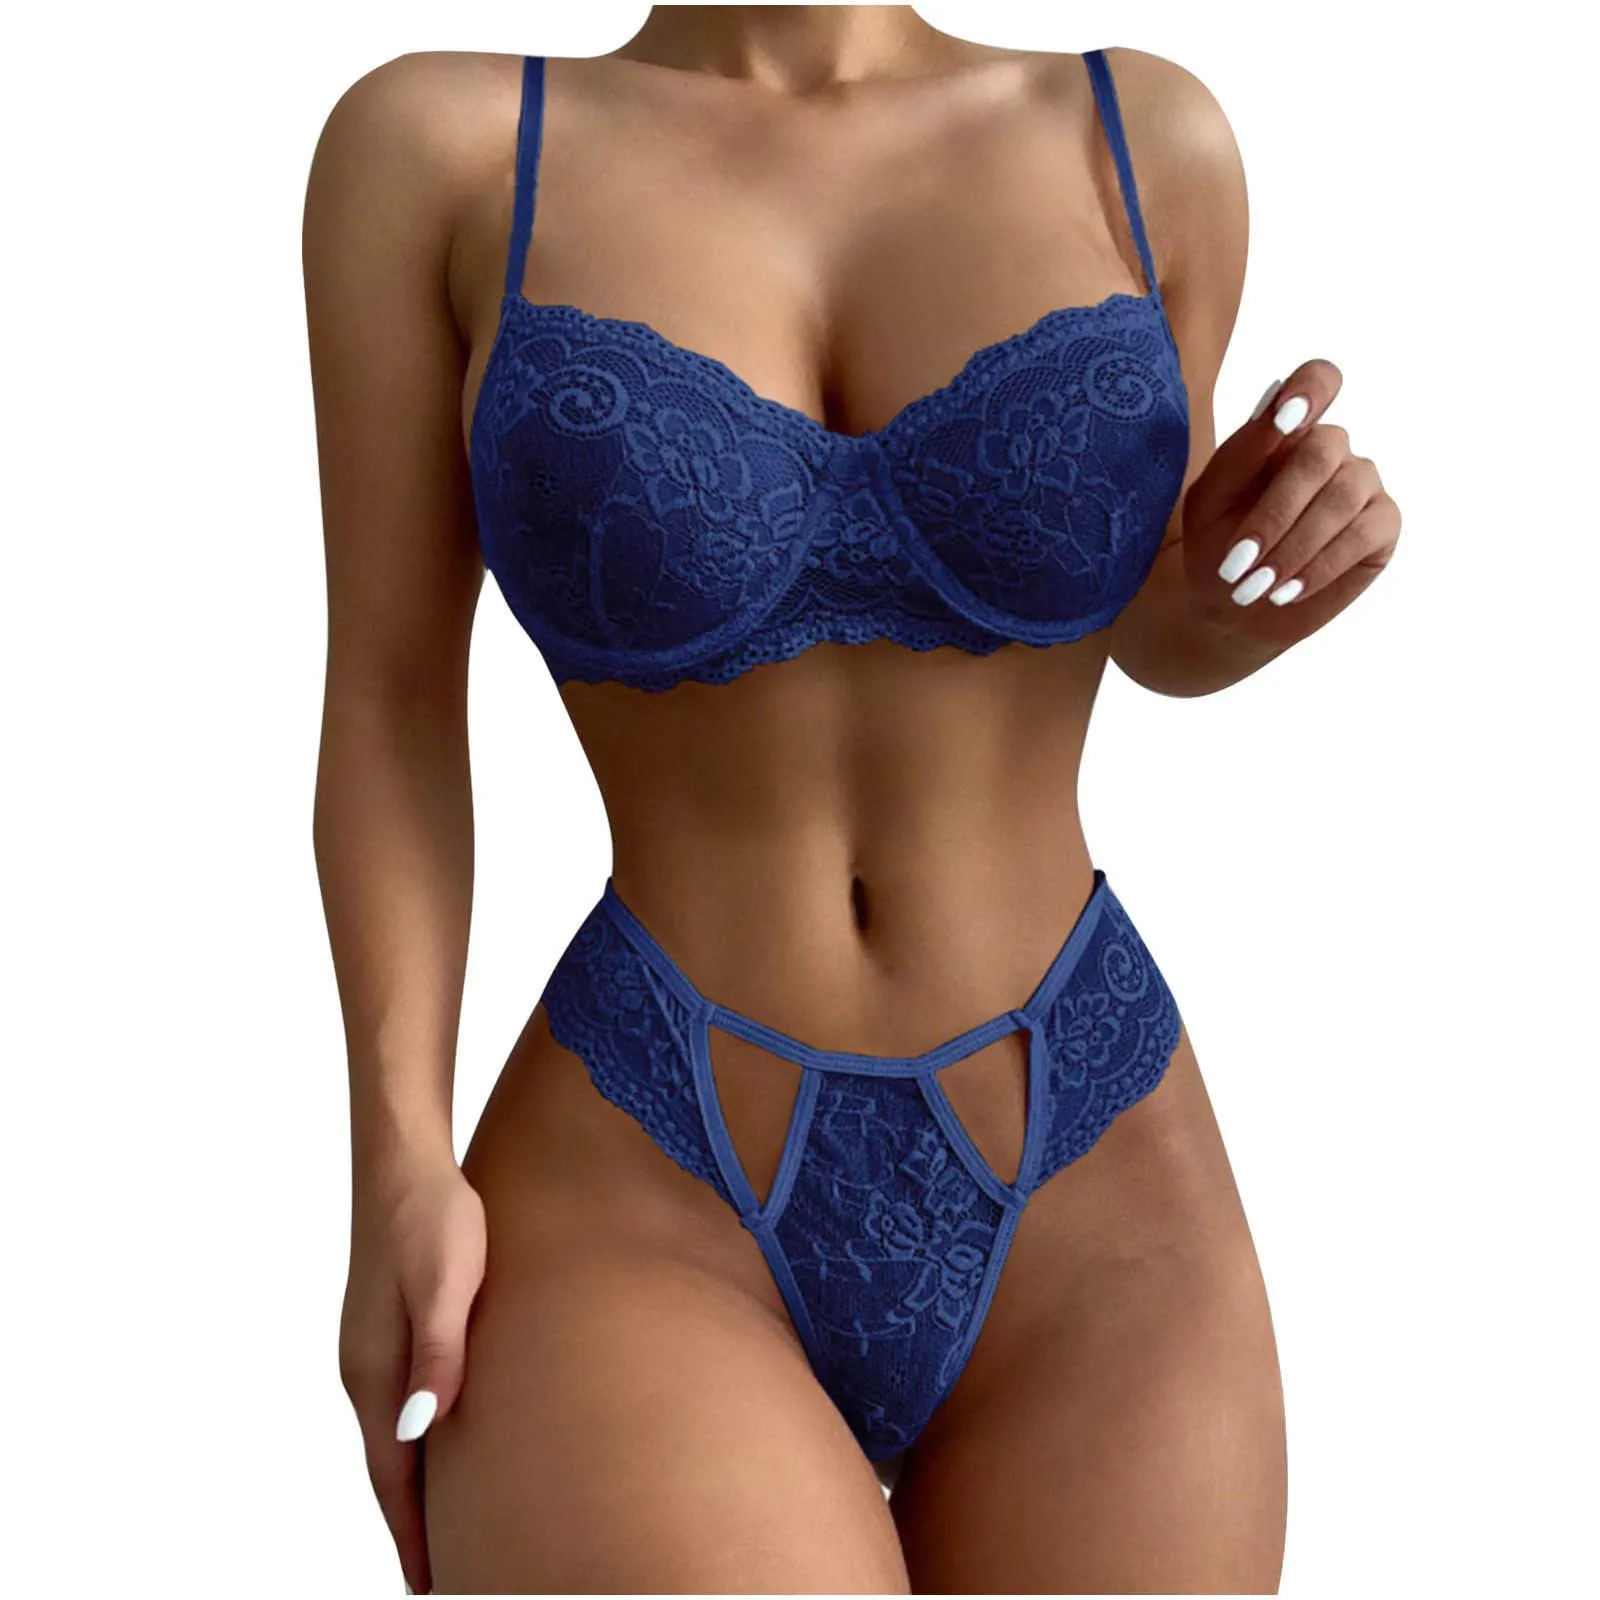 Porno Womens Underwear Chest Pad Bra Thong Sexy Lingerie Transparent Lace Mesh Erotic Costumes Mujer Temptation Sex Shop